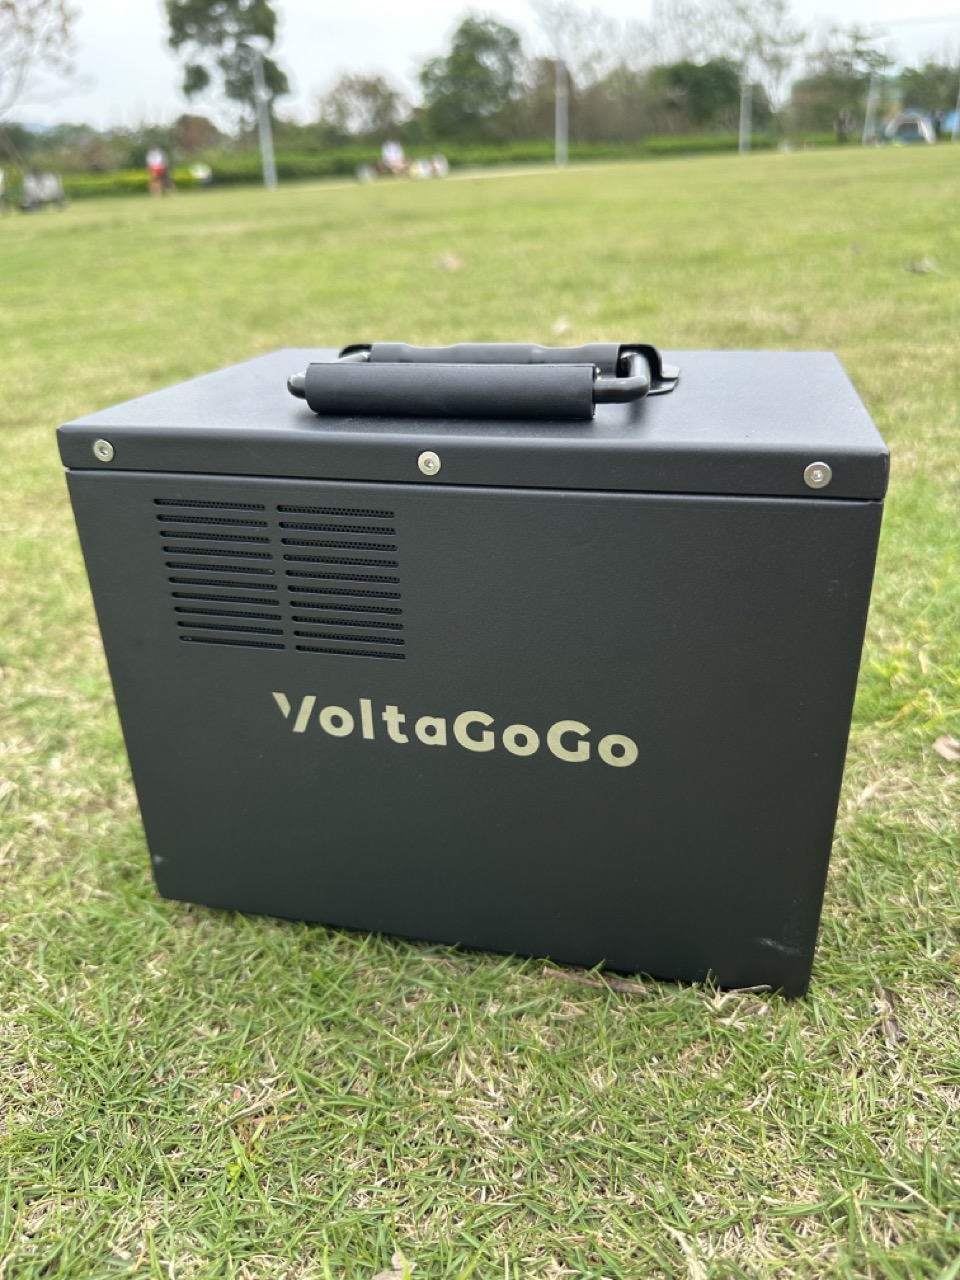 250w portable power for outdoors